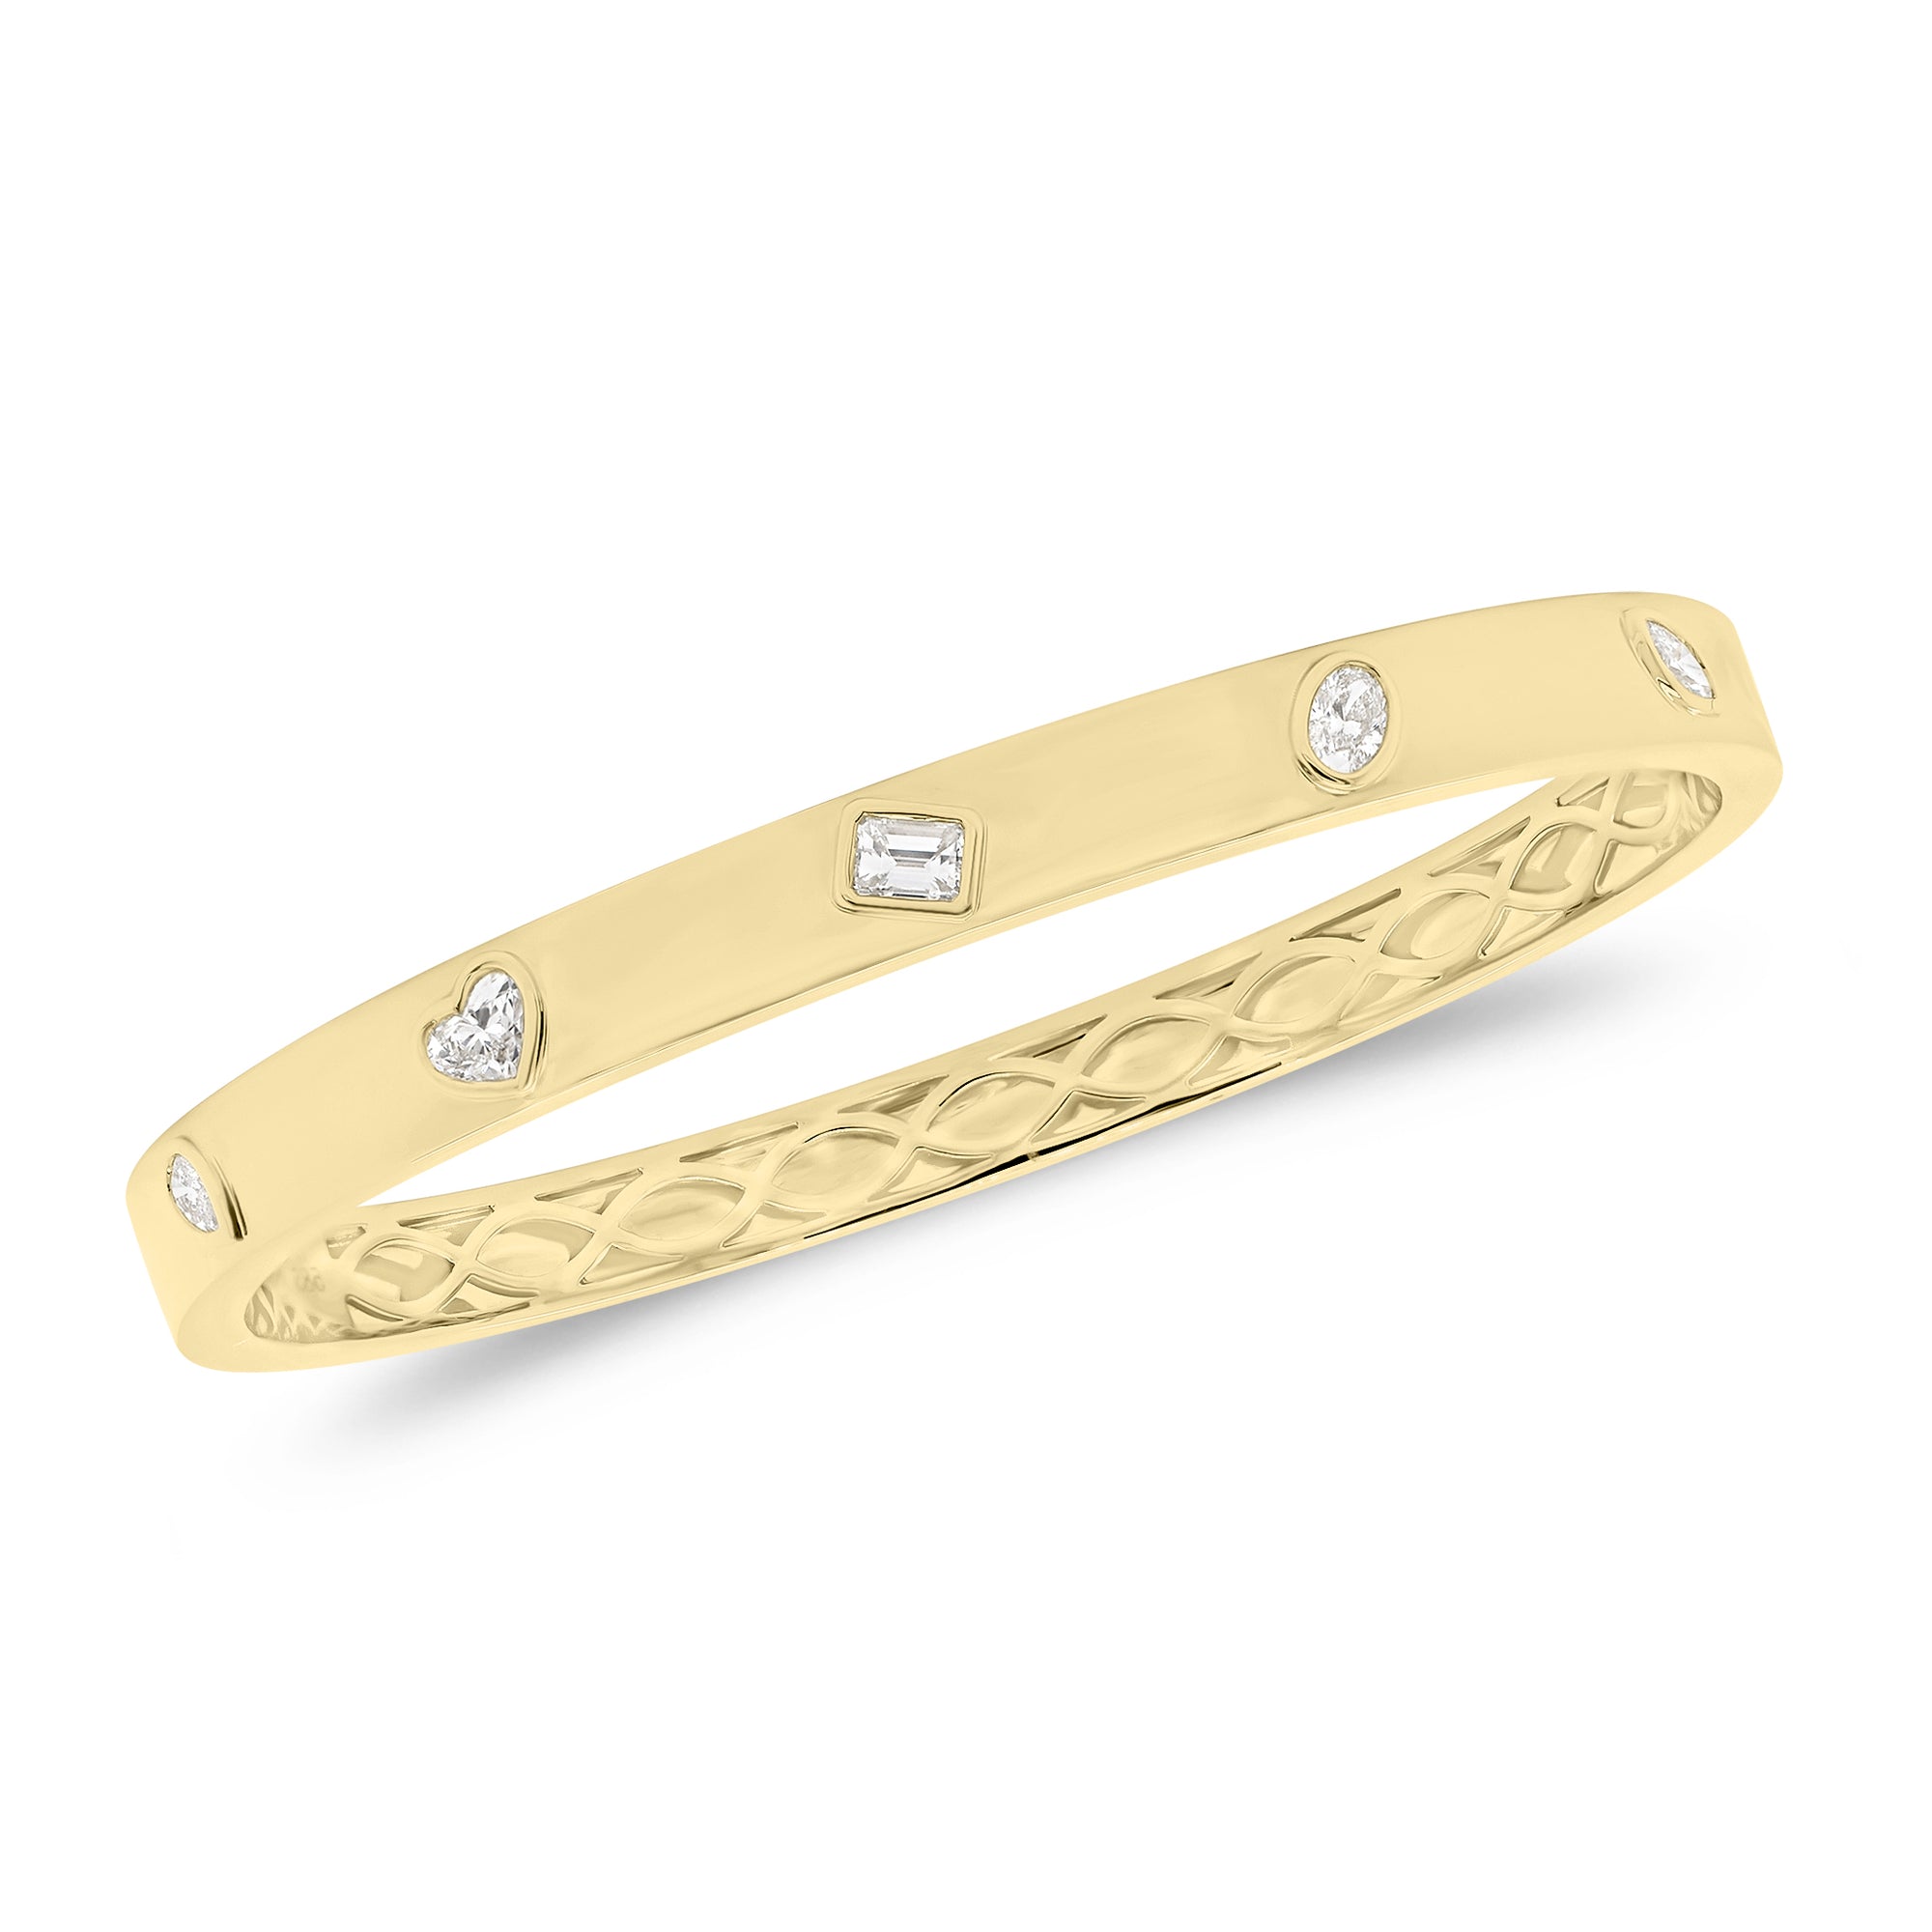 Mixed Shape Diamonds Bangle  -14K gold weighing 17.03 grams  -5 mixed-shape diamonds weighing 0.68 carats (Pear - heart - emerald - oval - marquee)